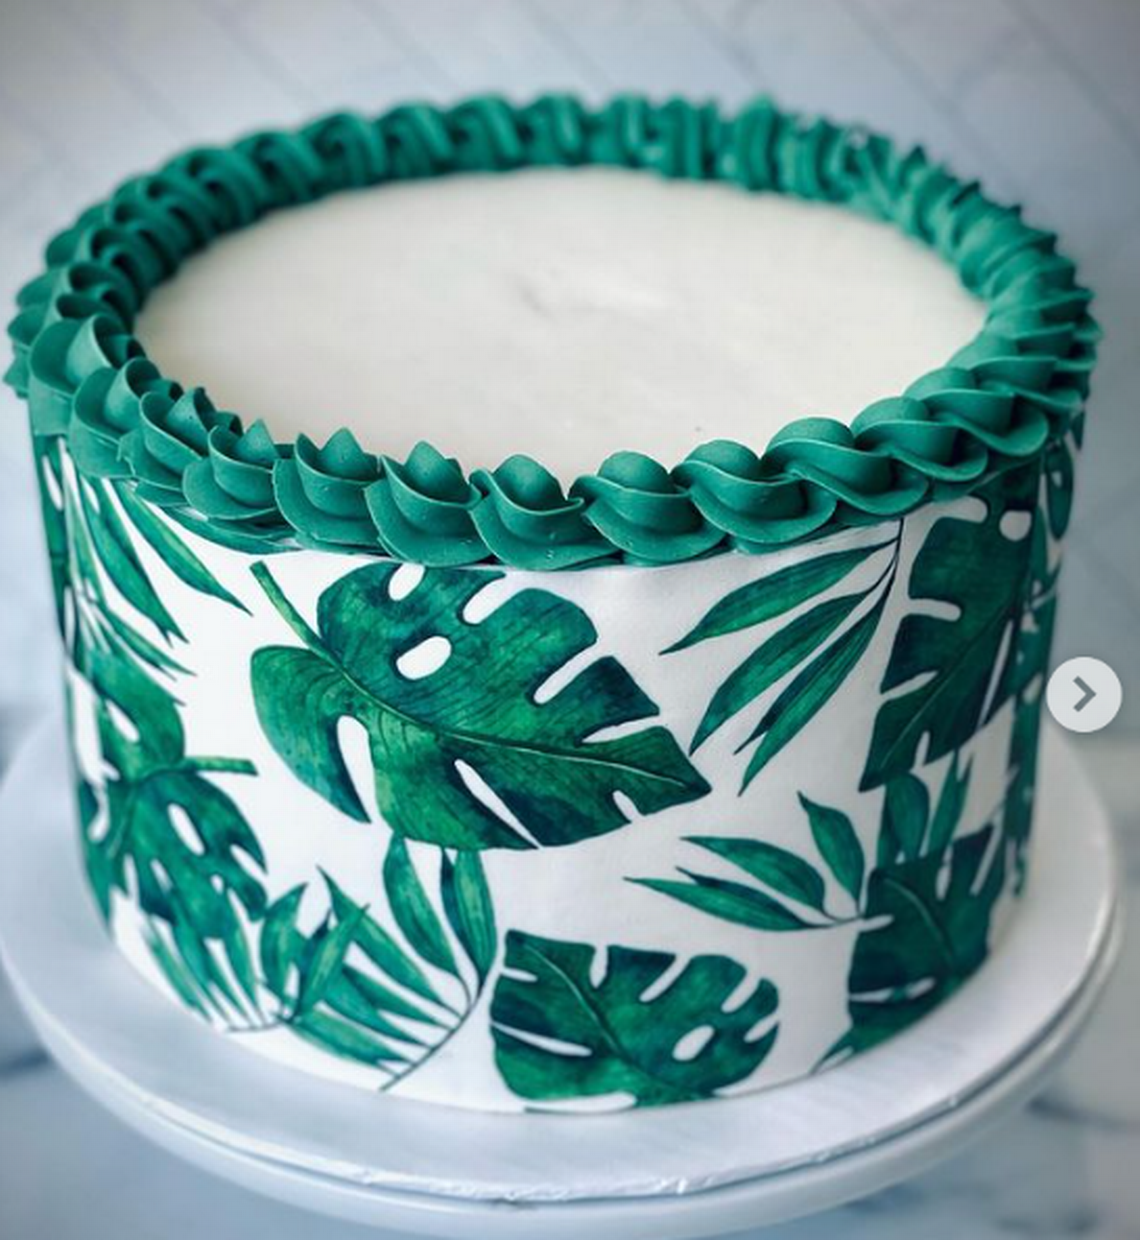 Tropical leaves themed chocolate cake for a luau graduation party by Simply Sweetz LLC, with (not pictured) pineapple cupcakes to match. Courtesy: @simplysweetz_llc Instagram